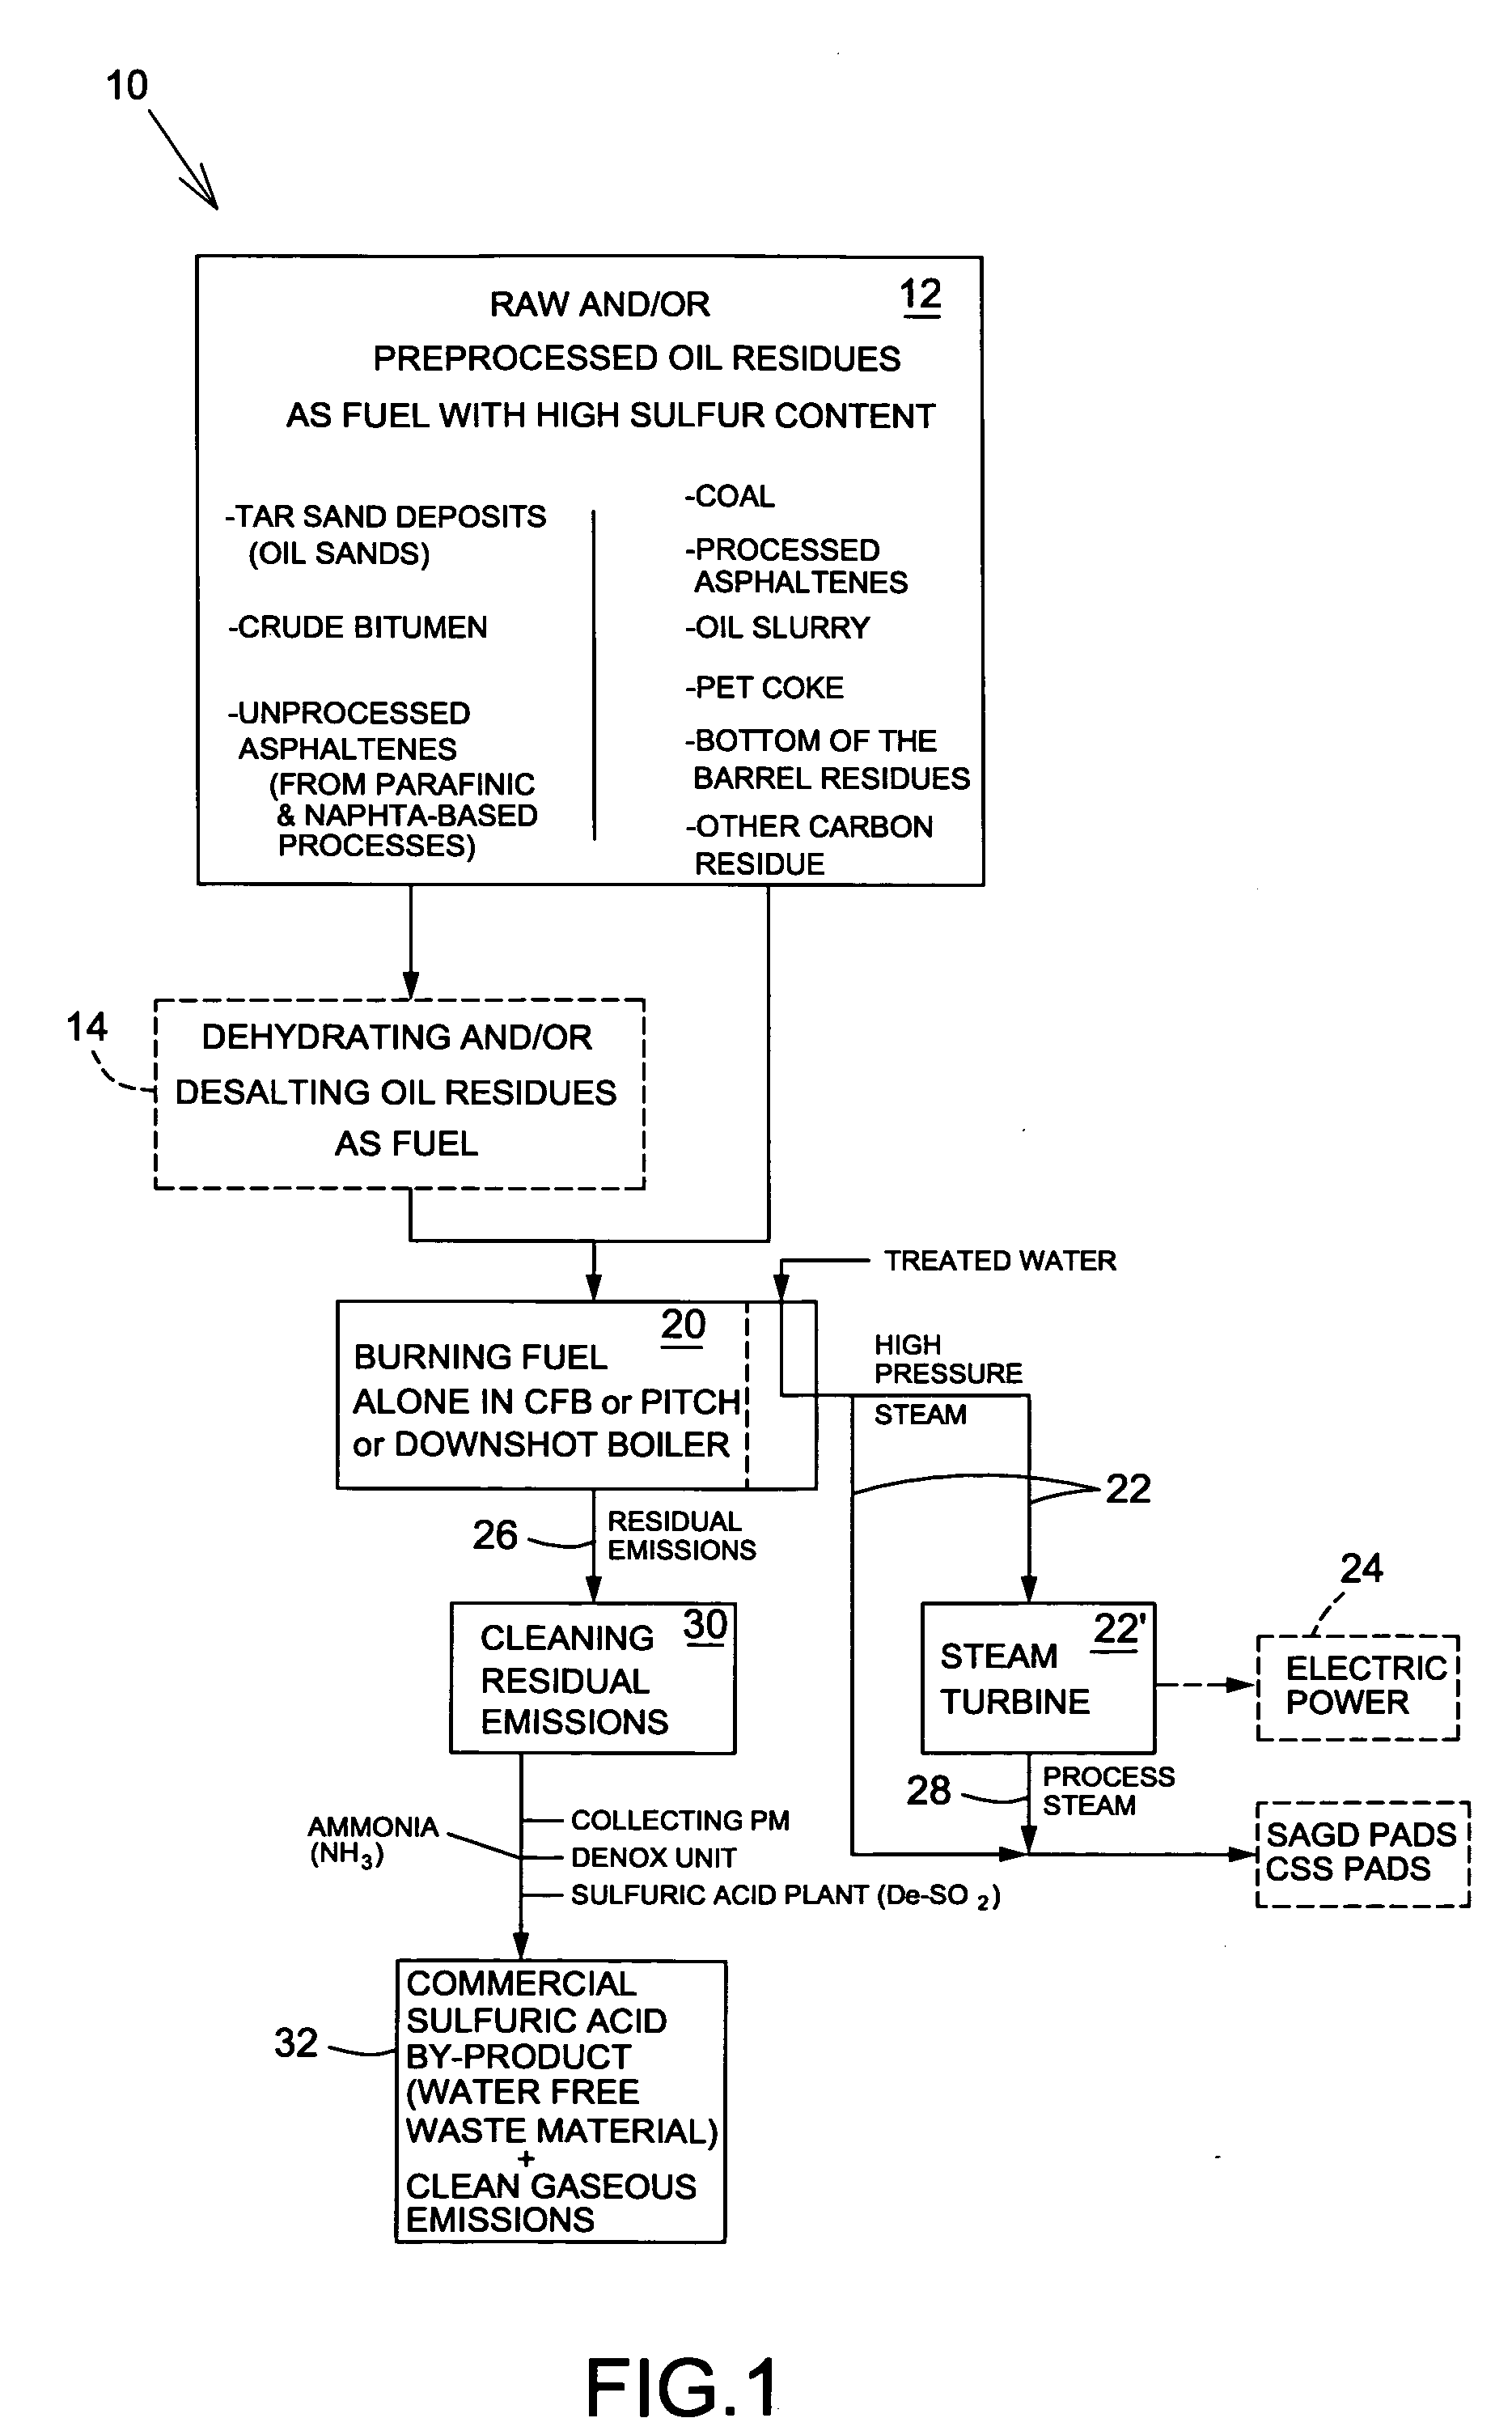 Process for producing steam and/or power from oil residues with high sulfur content